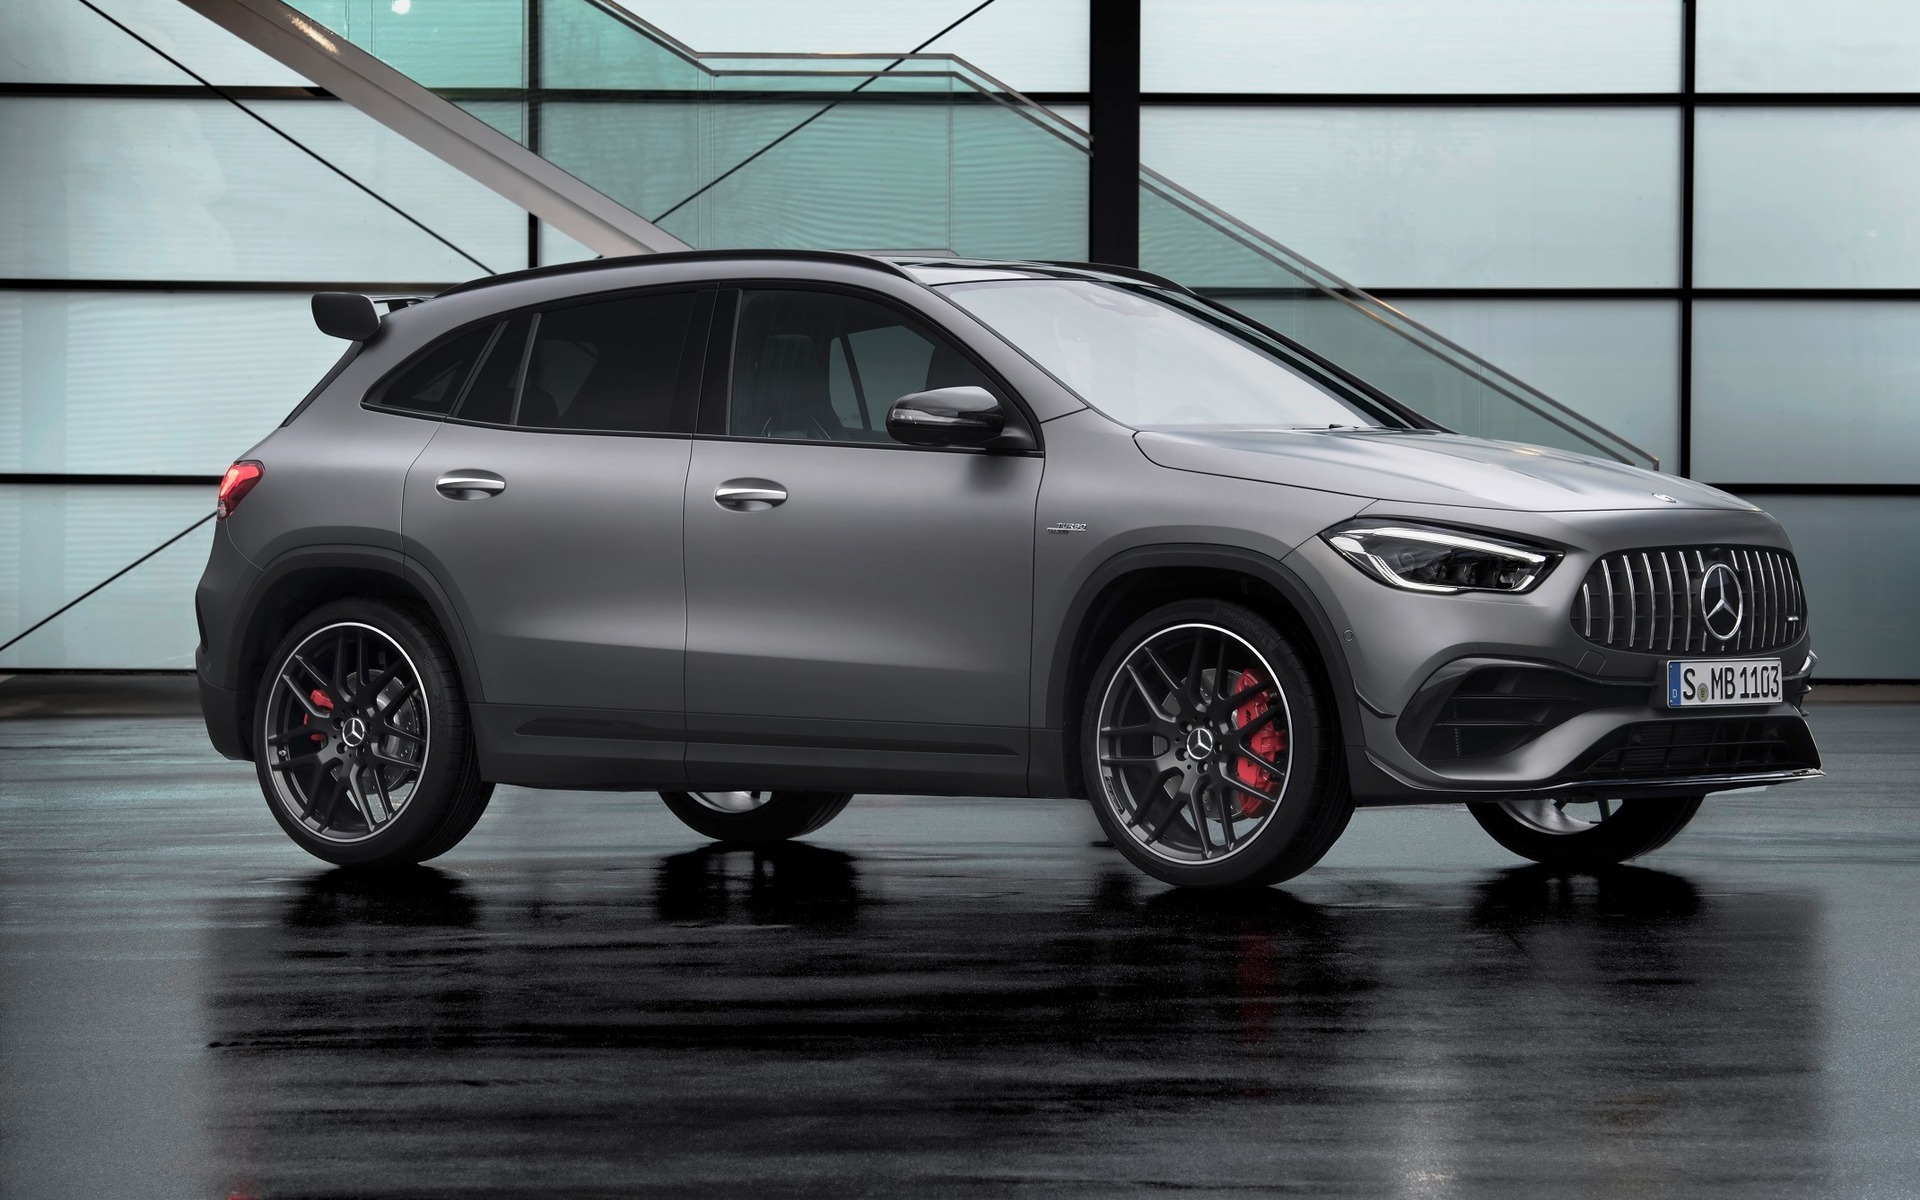 2021 Mercedes-AMG GLA 45 is Back With a 382-hp Engine - The Car Guide